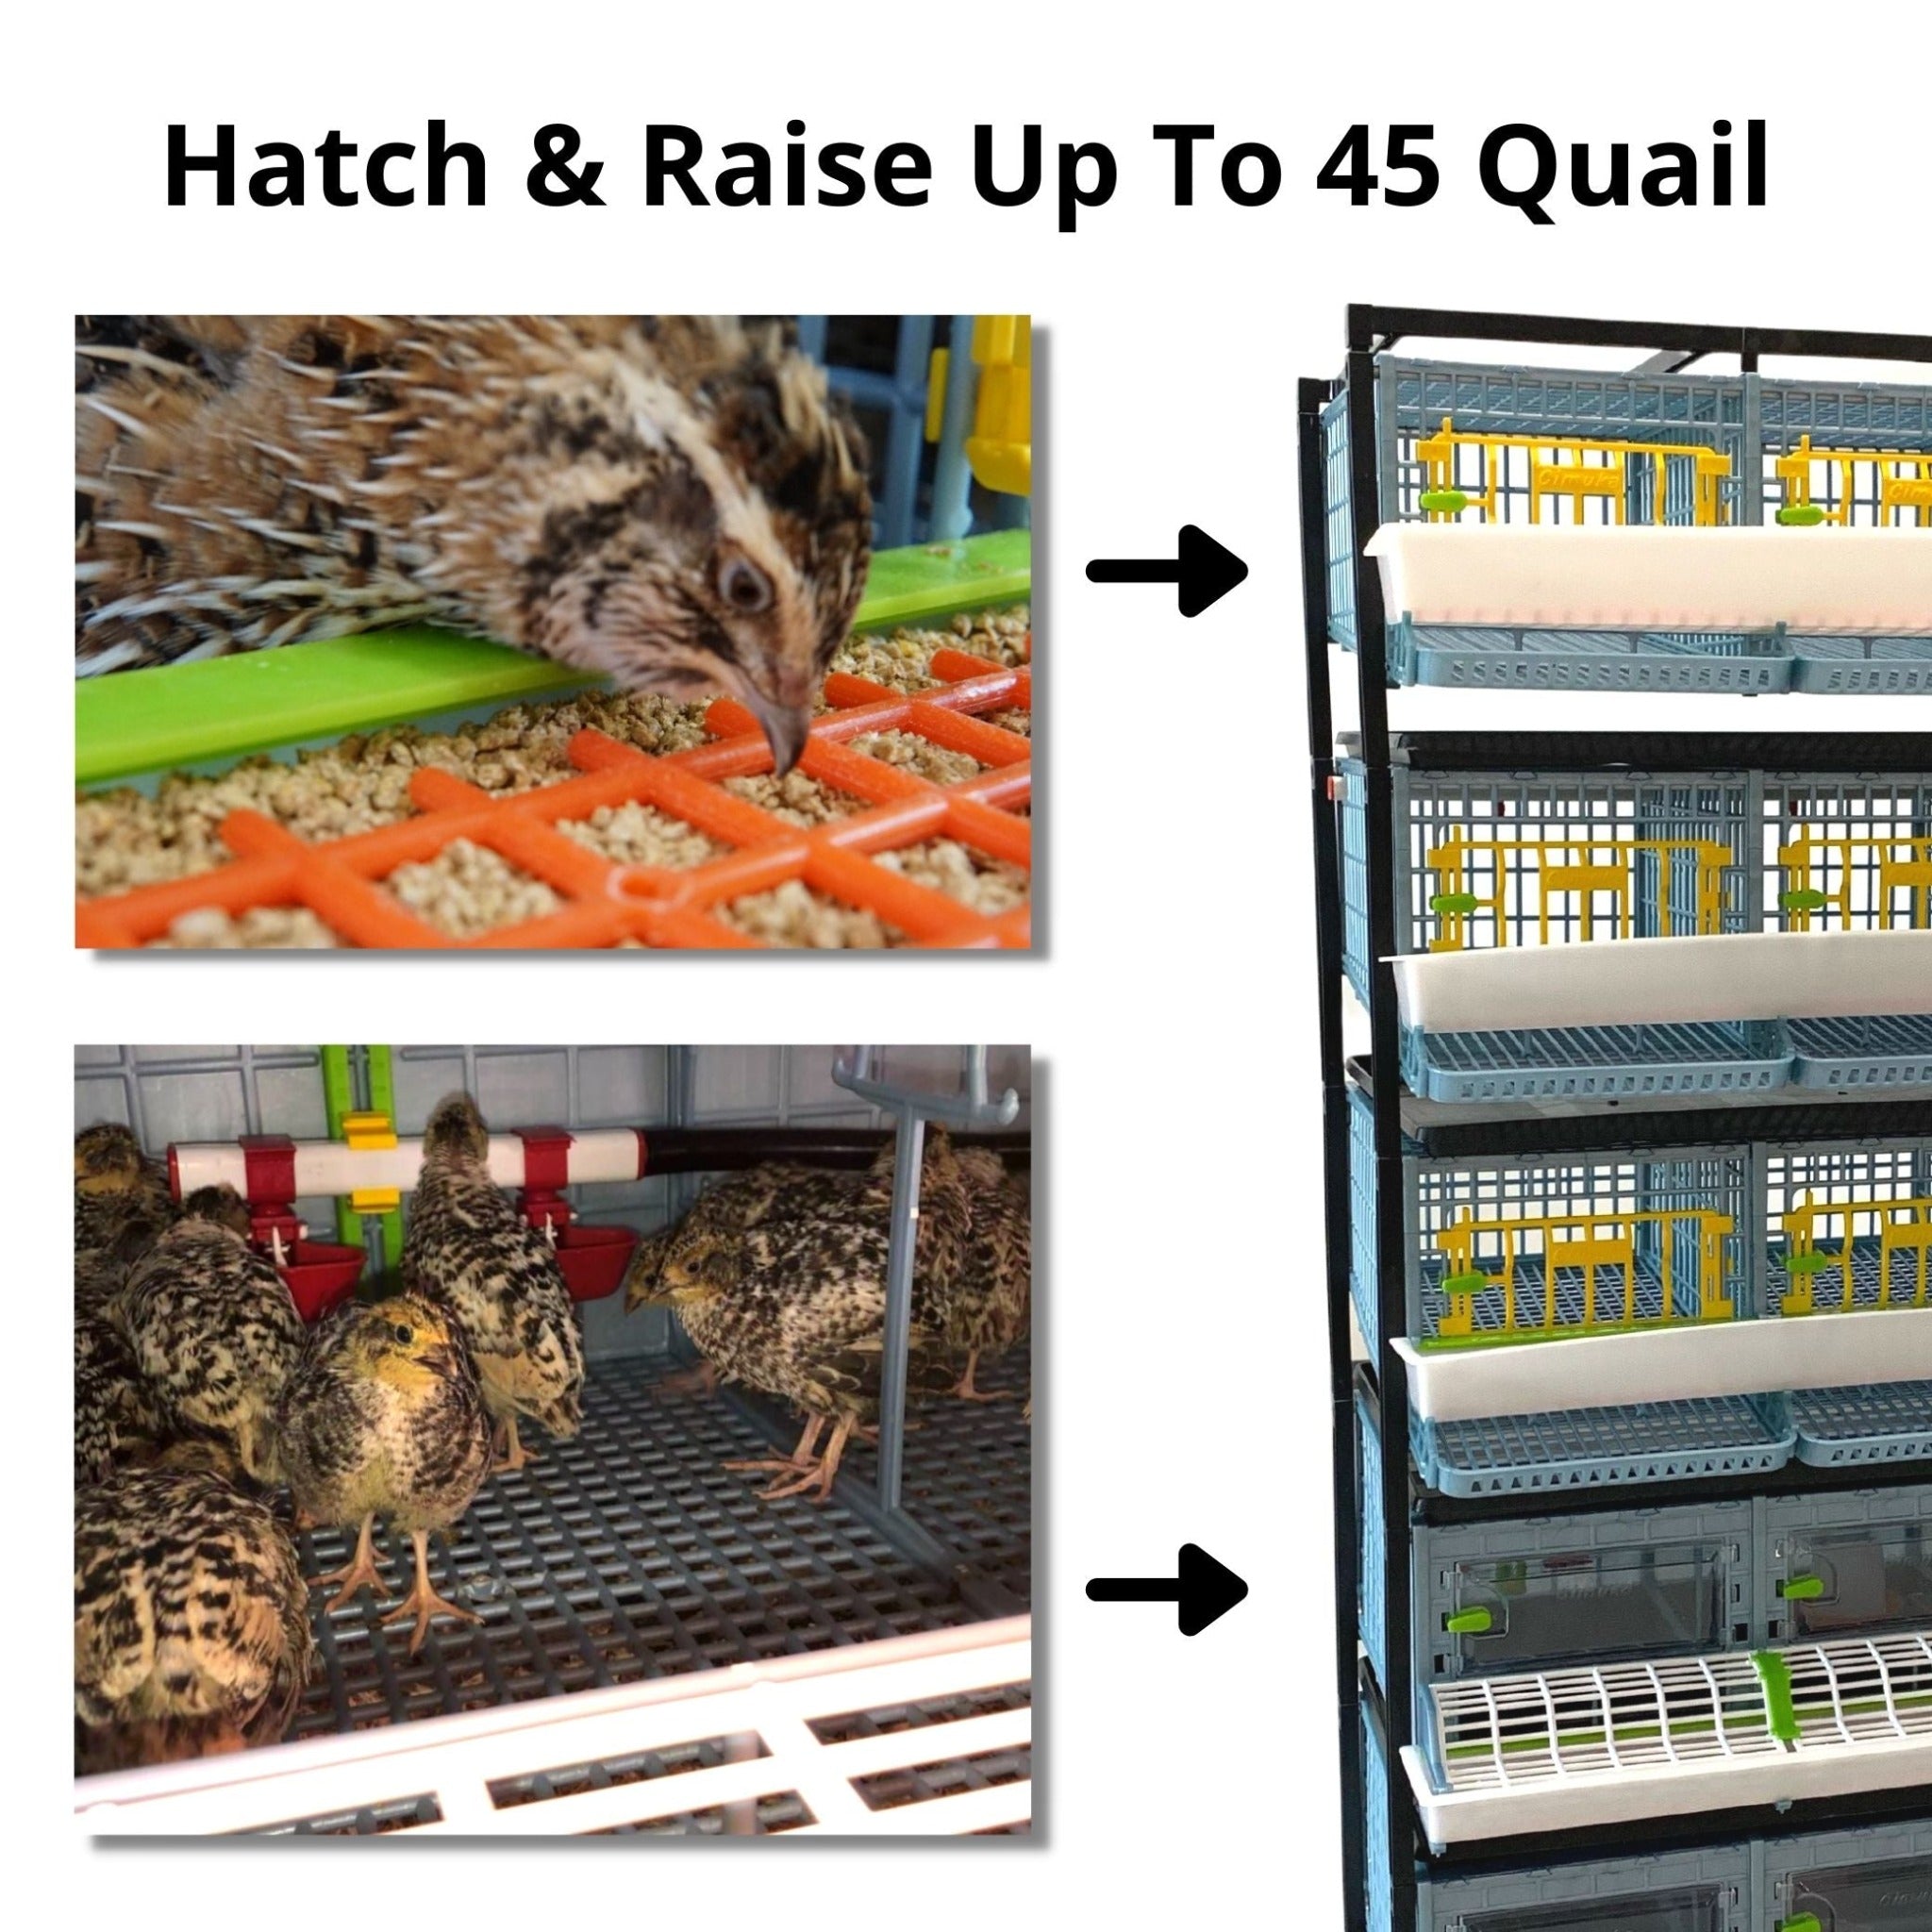 Hatching Time Cimuka. Raise up to 45 quails in hatching time brooder and quail cage system that is stackable. Quail in image are feeding from trough and walking in community floor plan quail cage.